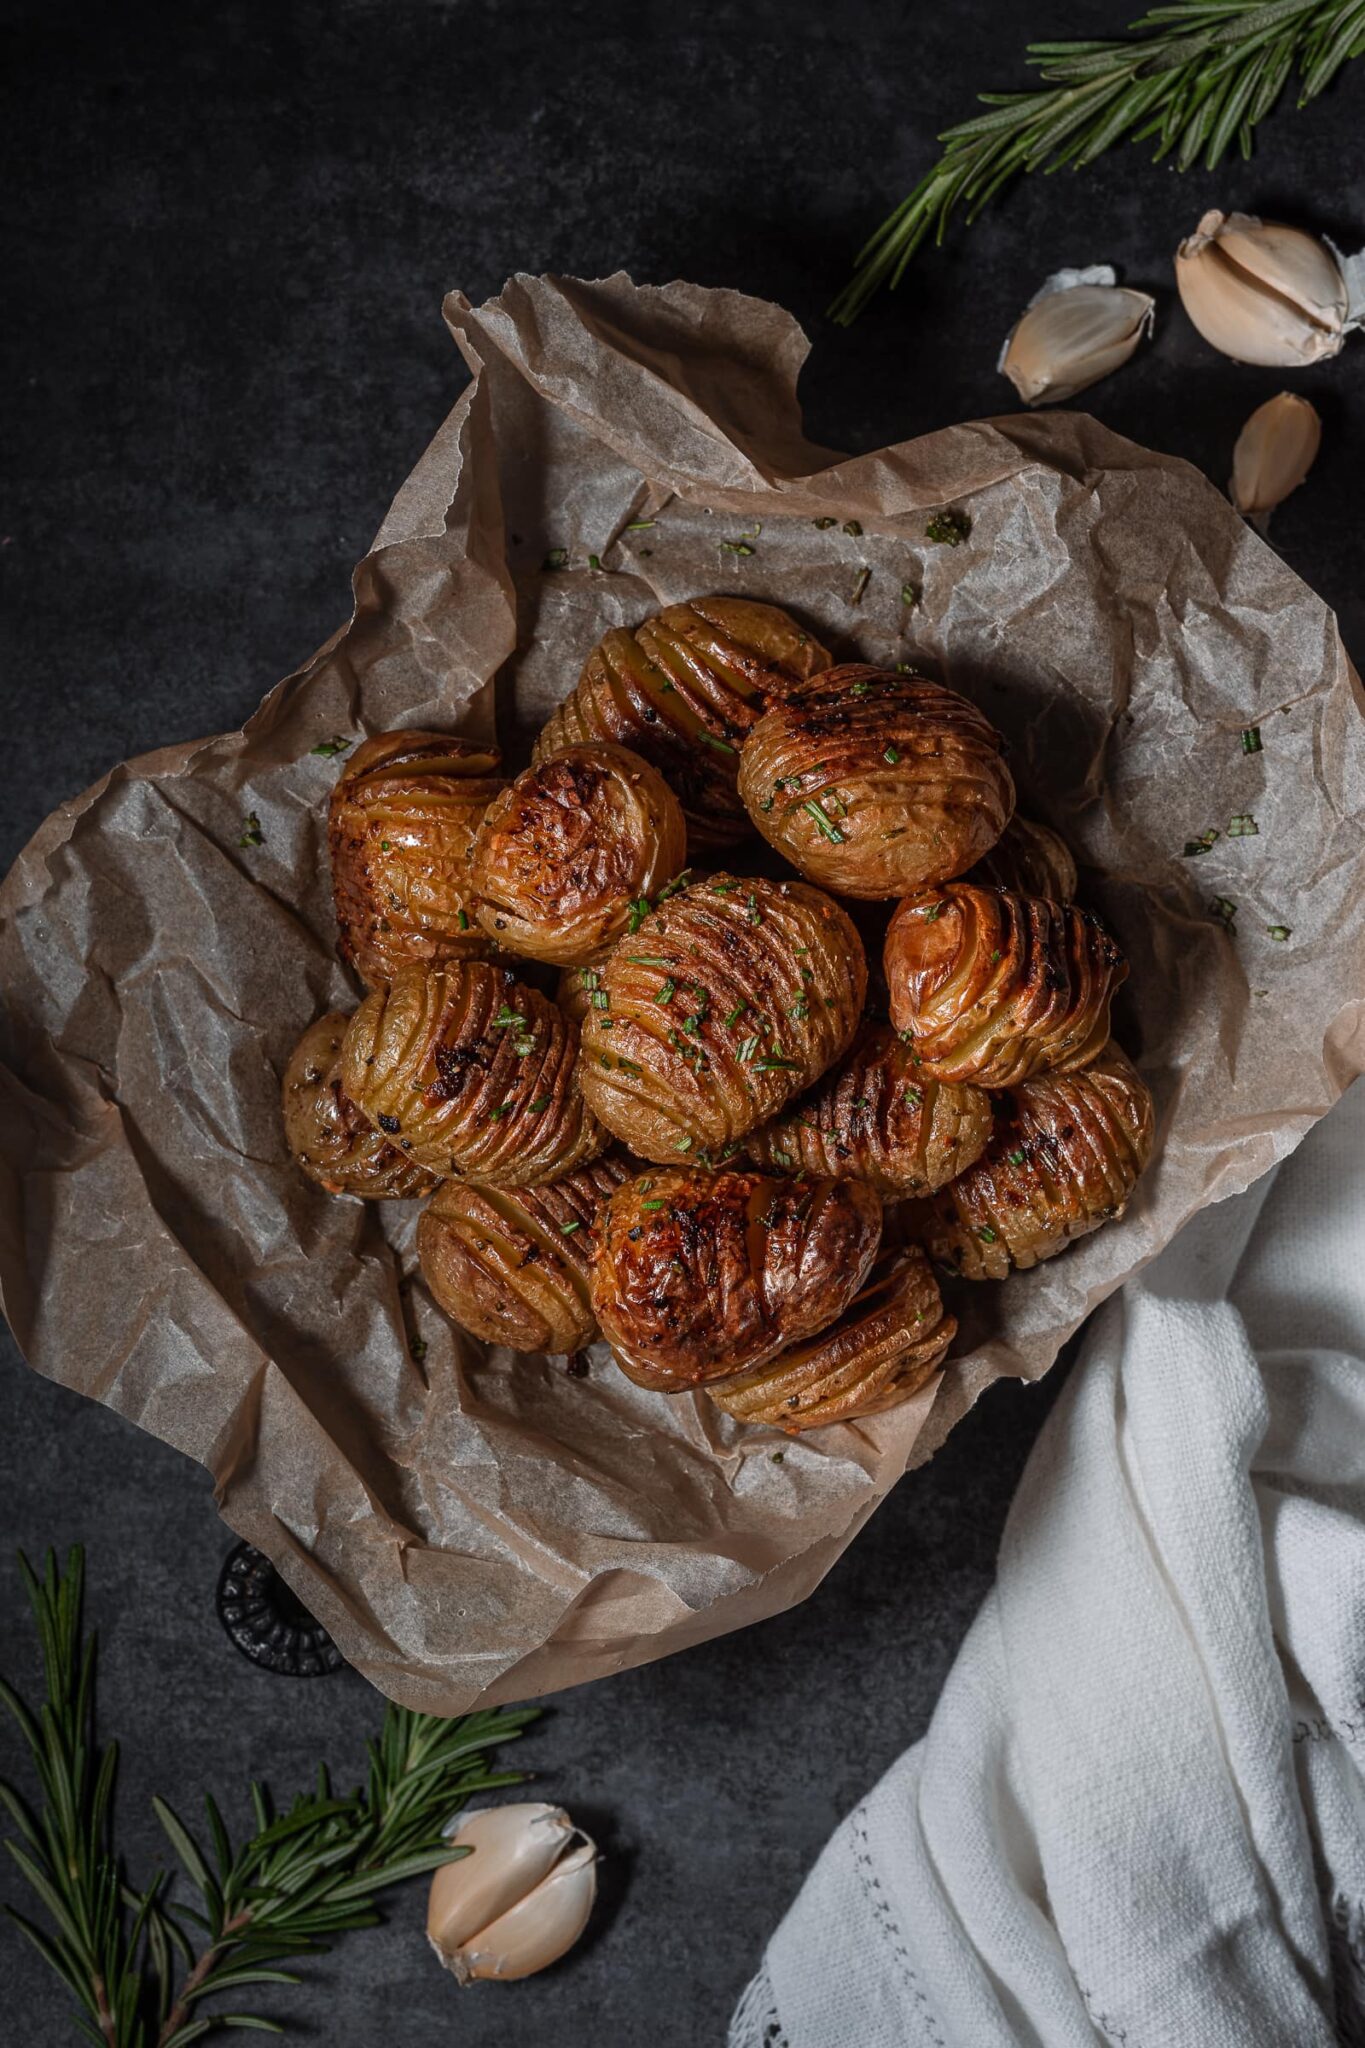 Hasselback potatoes with fresh rosemary on parchment.